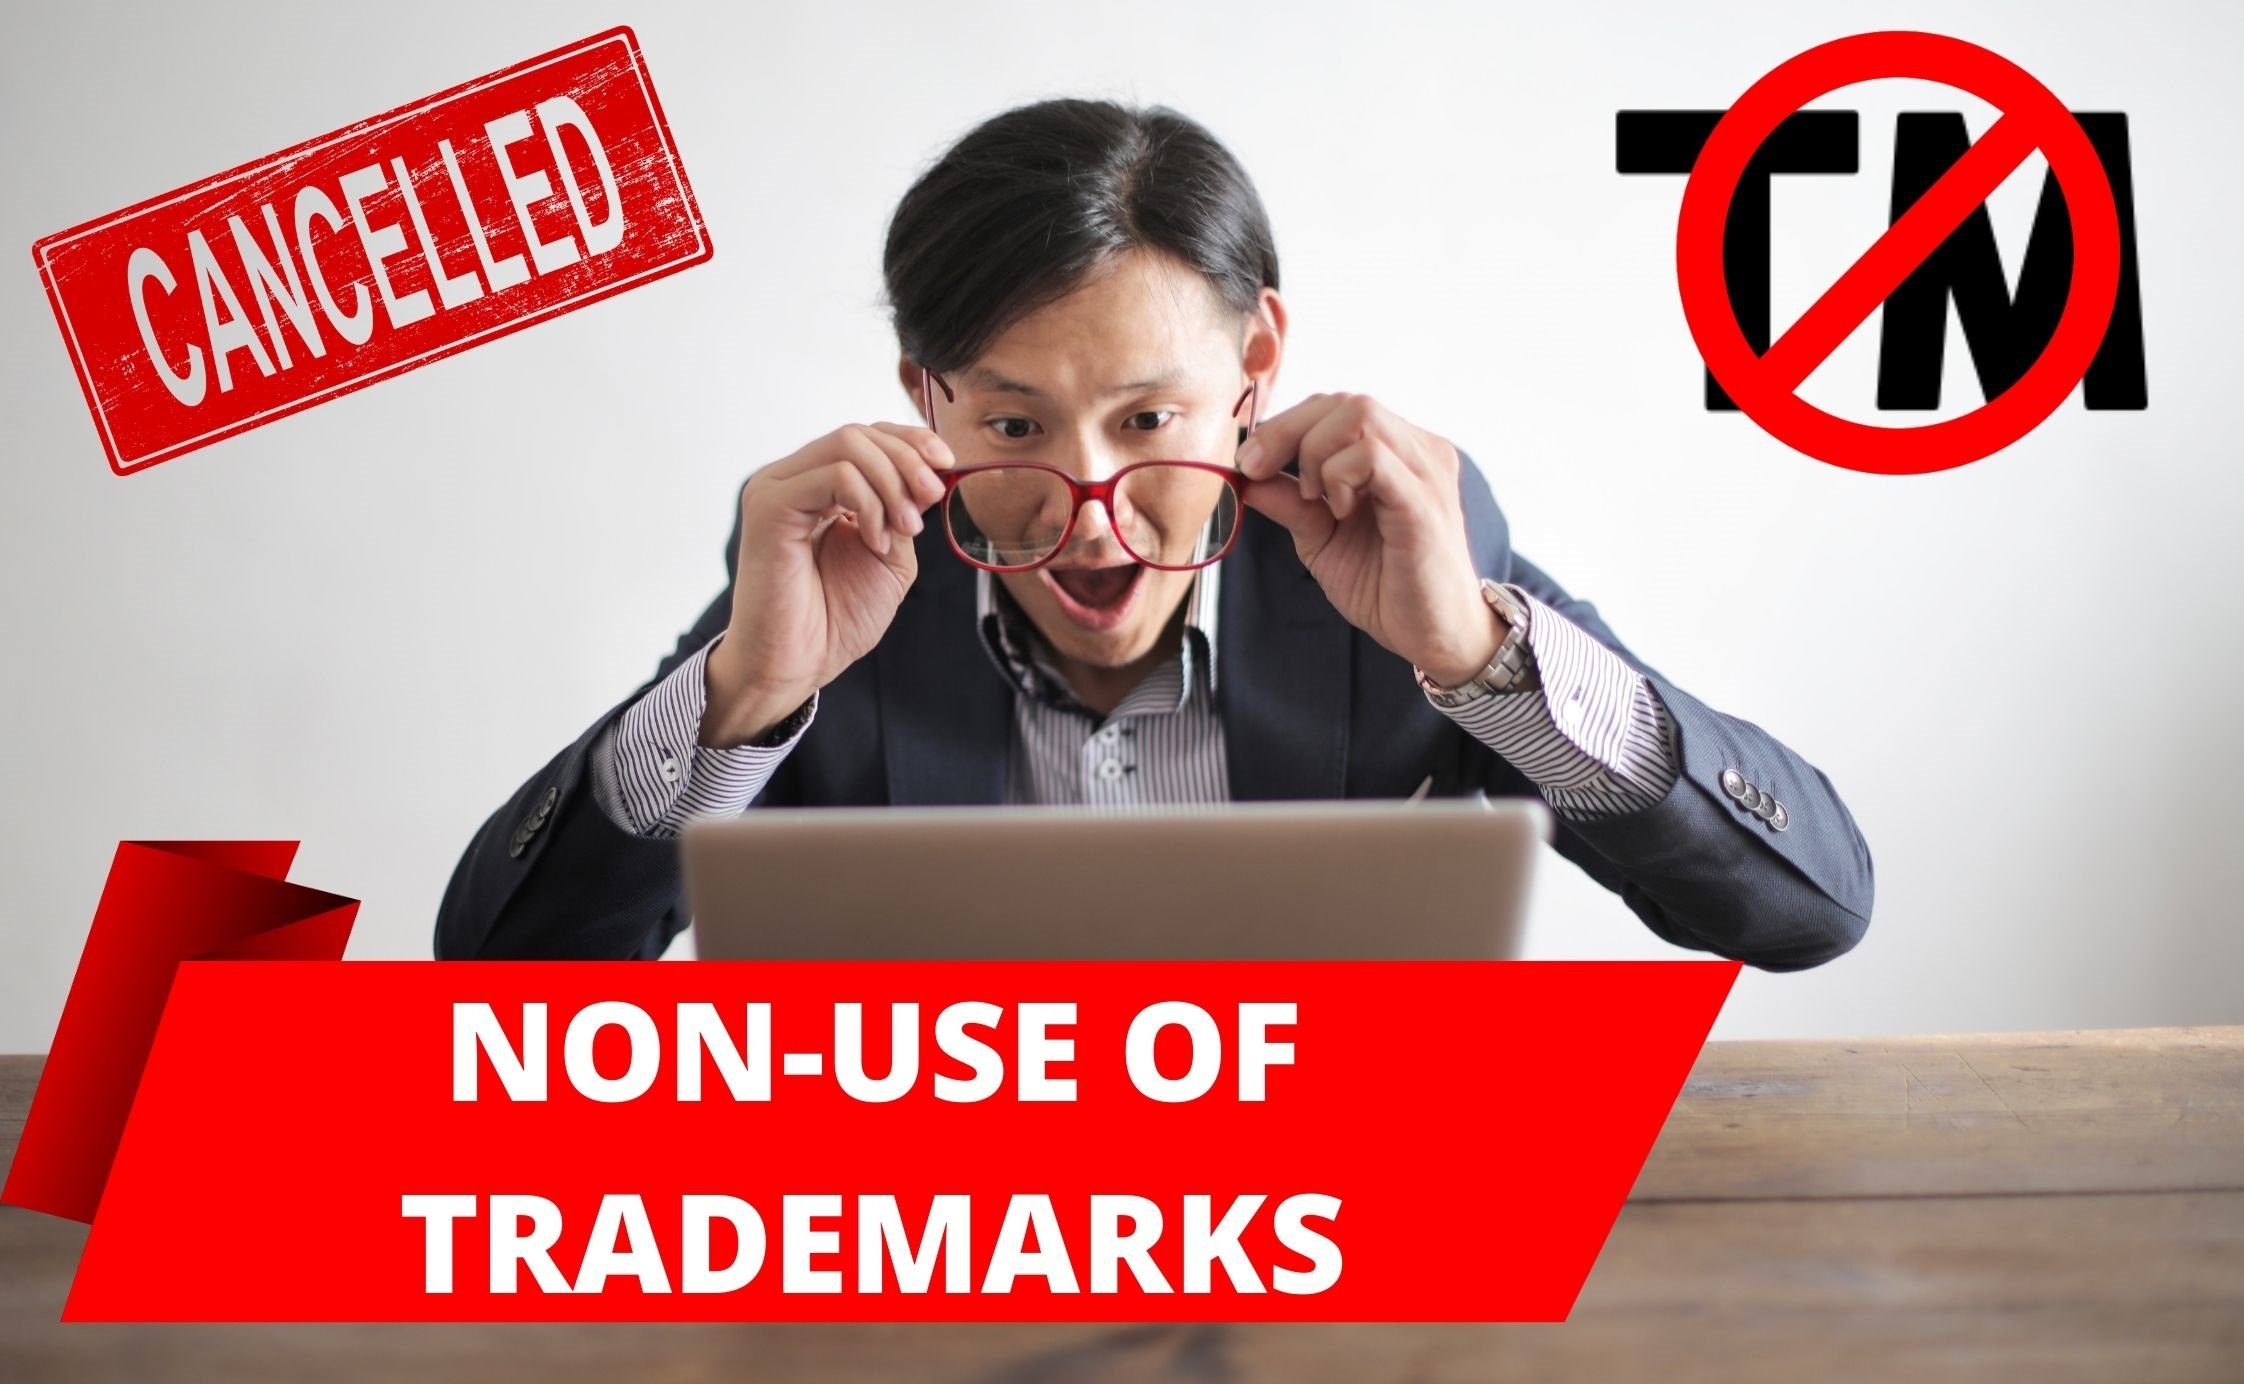 NON-USE OF TRADEMARKS